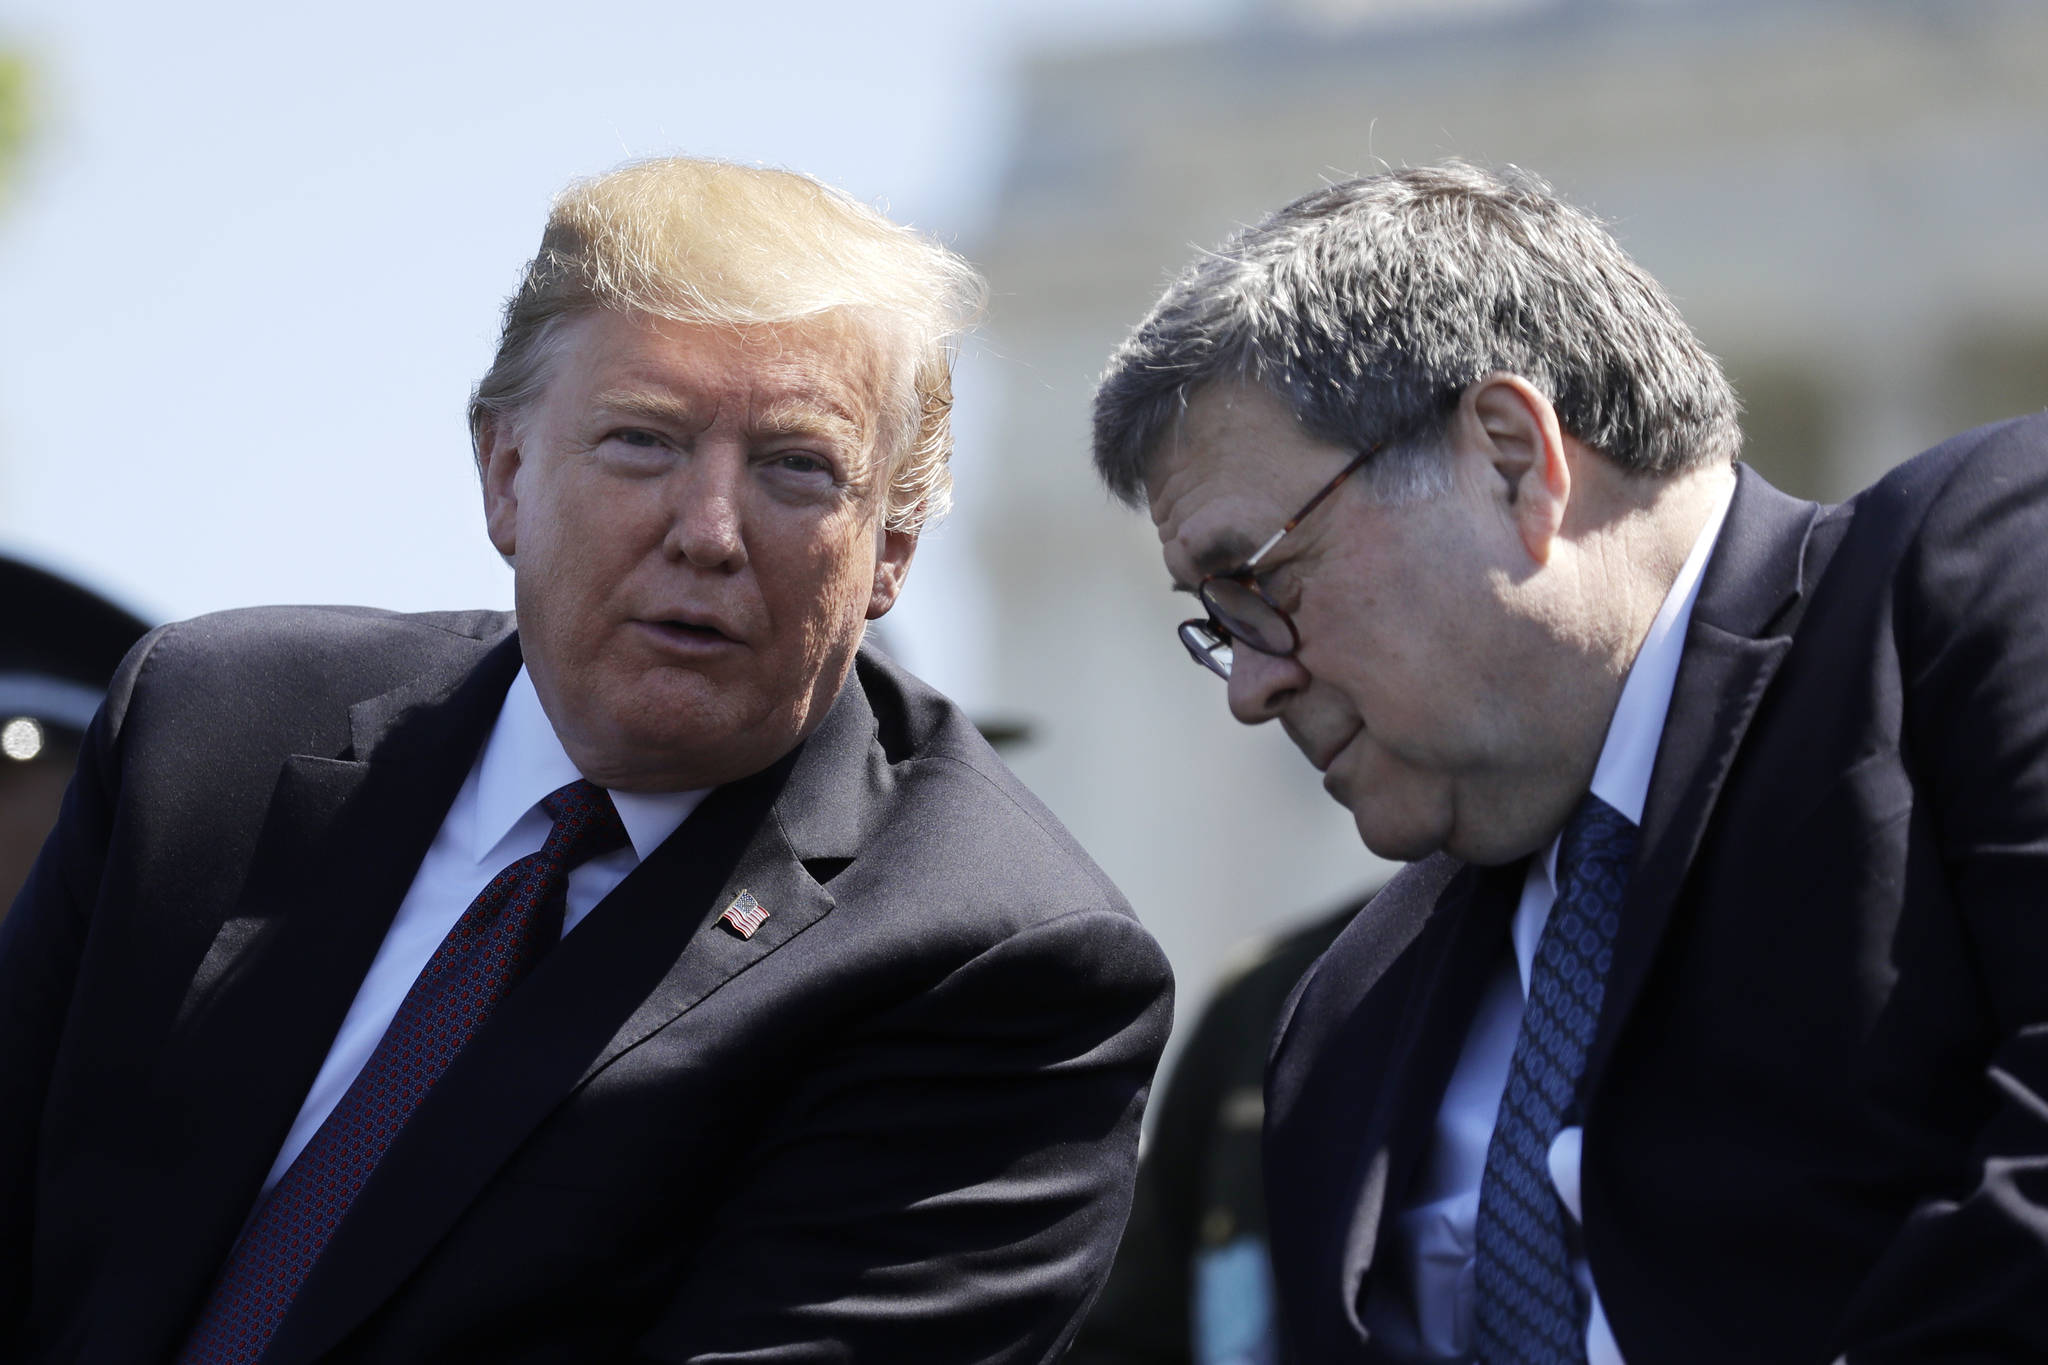 In this May 15, 2019, file photo, President Donald Trump and Attorney General William Barr speak at the 38th Annual National Peace Officers’ Memorial Service at the U.S. Capitol in Washington. Trump is directing the U.S. intelligence community to “quickly and fully cooperate” with Barr’s investigation of the origins of the multi-year probe into whether Trump’s 2016 campaign colluded with Russia (AP Photo/Evan Vucci, File)